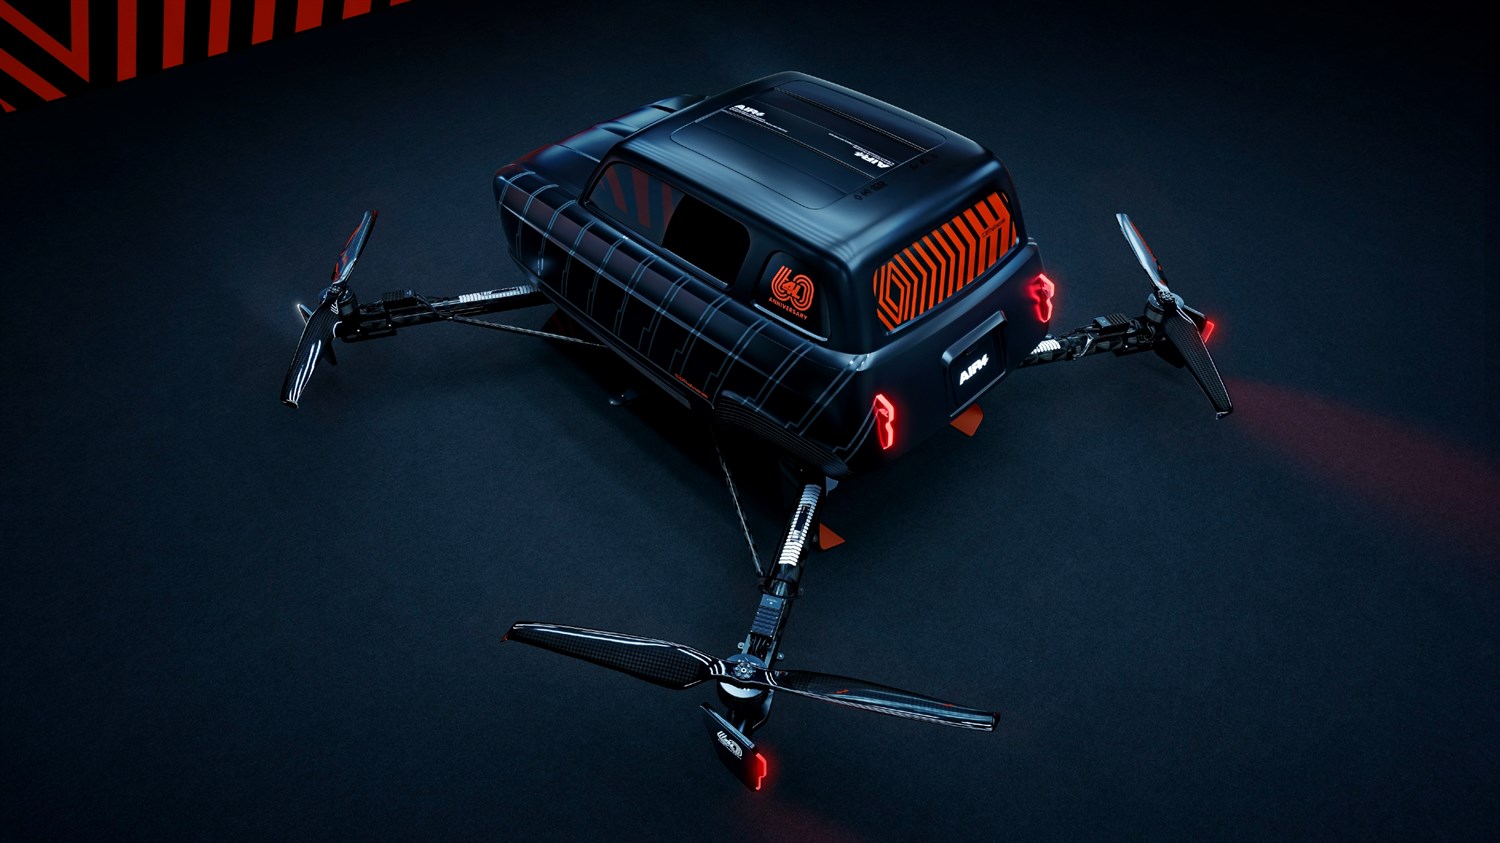 Renault and Thearsenale unveil AIR4: where we're going, we don't need roads